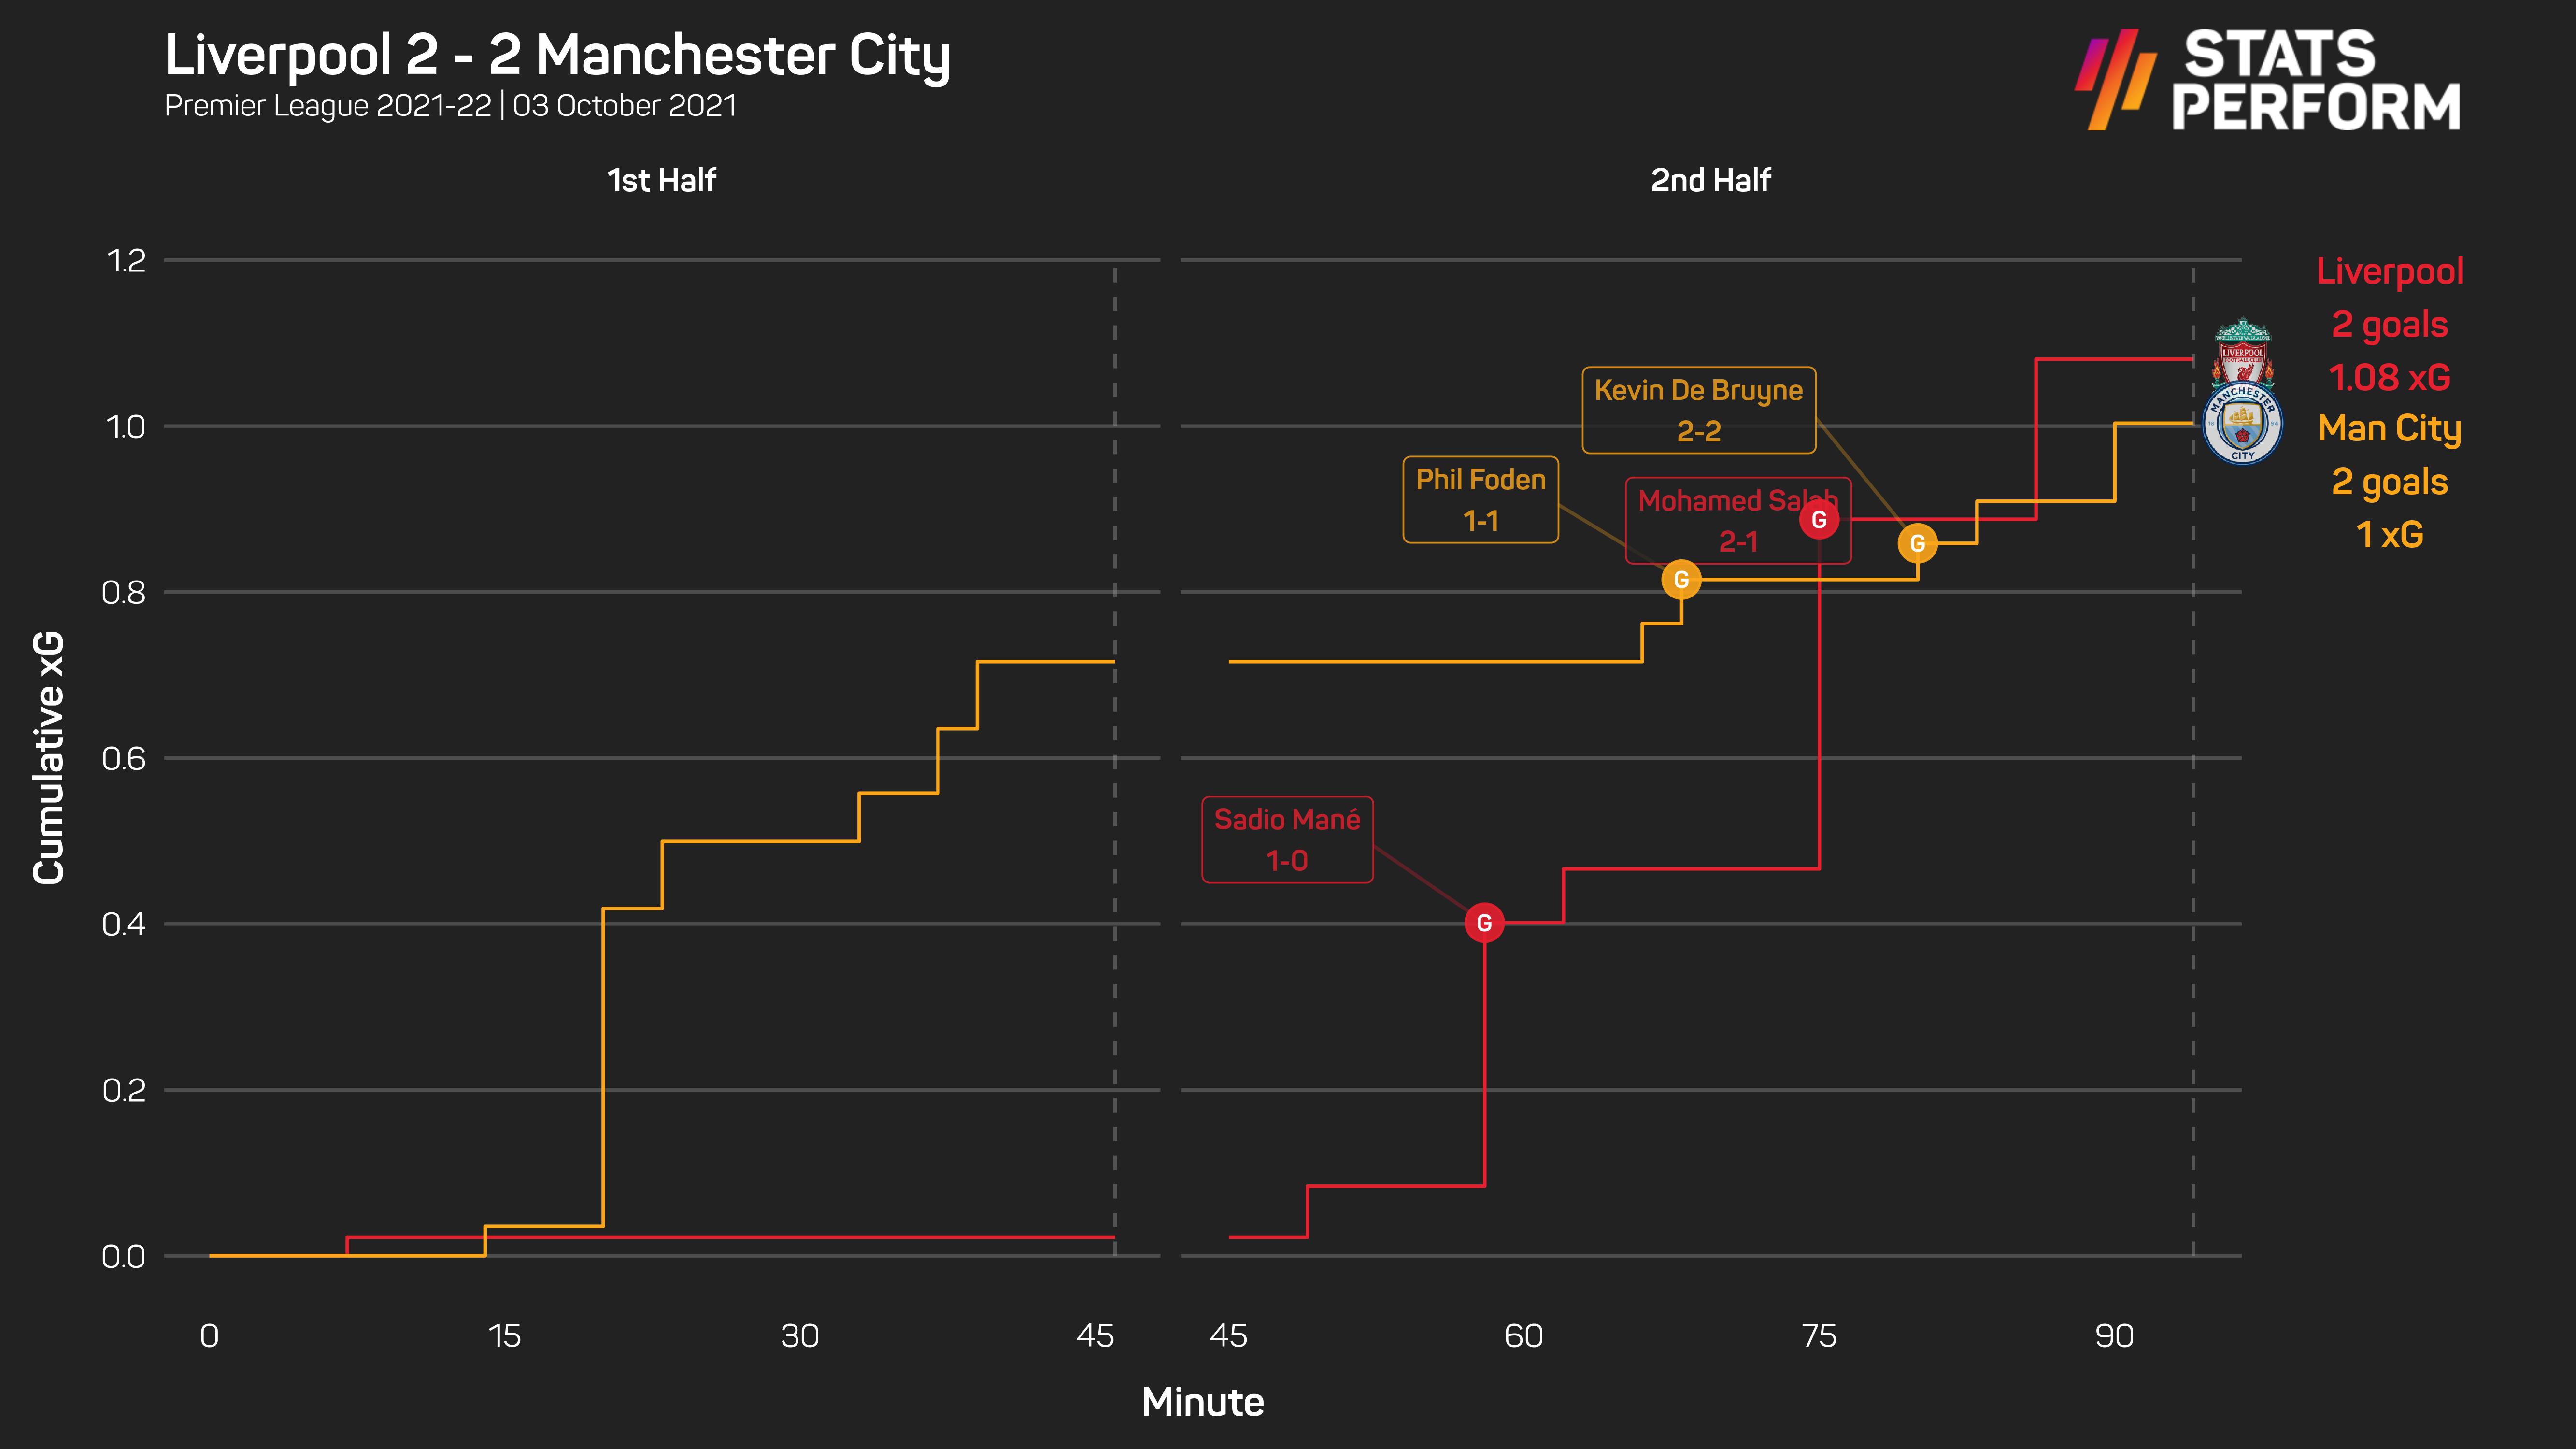 Liverpool and Manchester City played out an entertaining back and forth